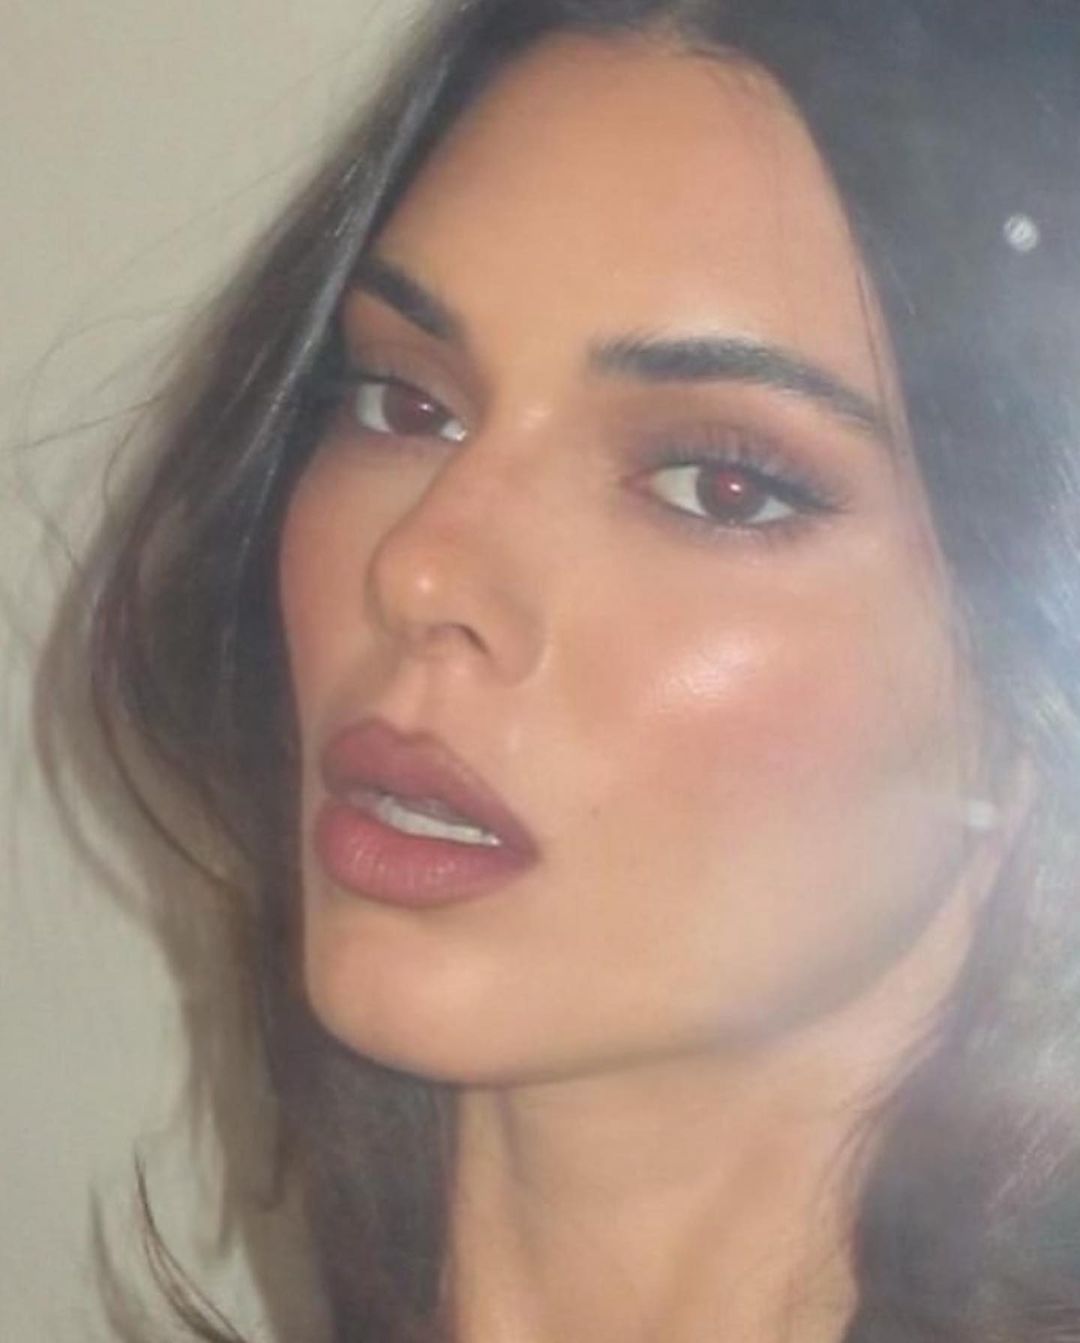 Mary Phillips' Makeup on Kendall Jenner's Face